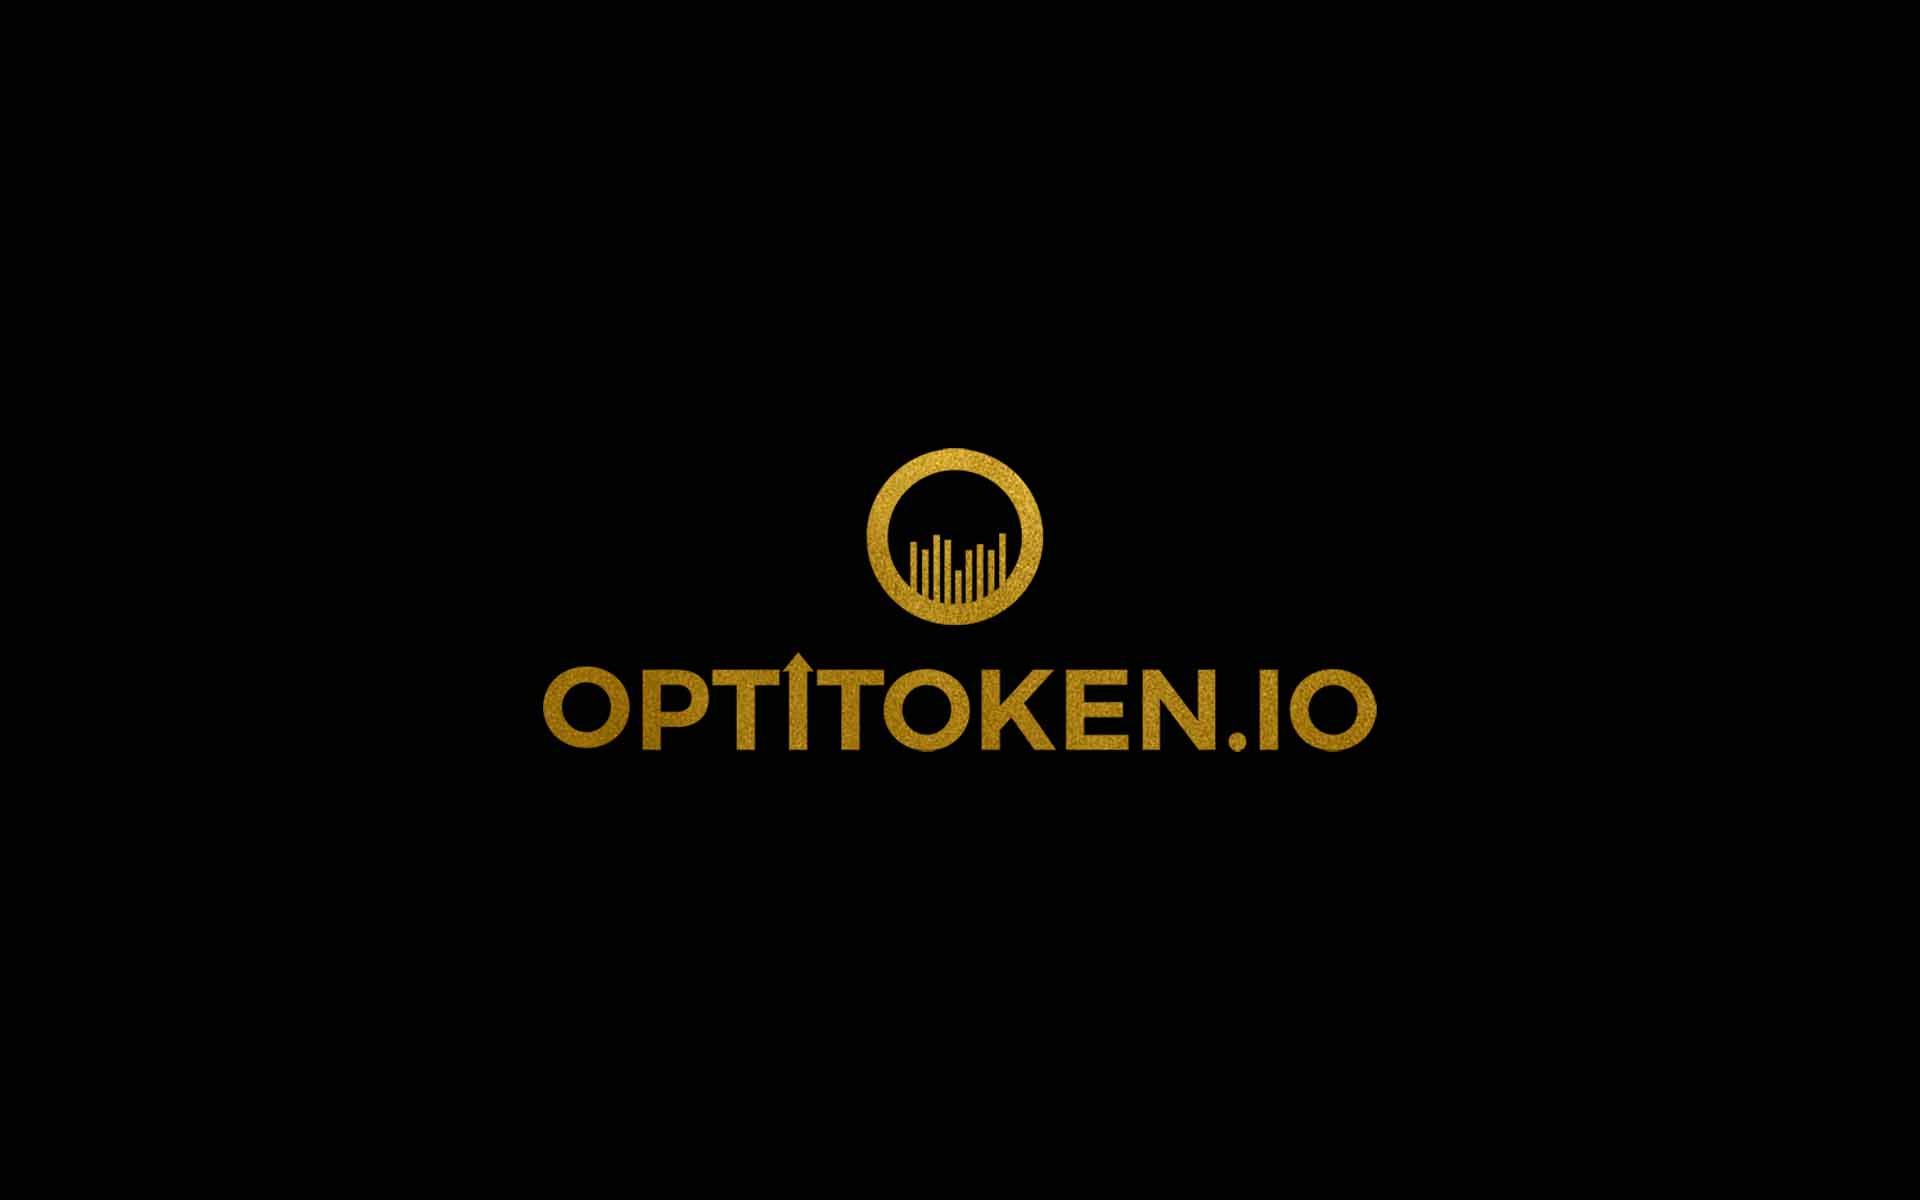 Optitoken adds former iShares and BlackRock Consultant to Team and Solidifies Rank As Top ICO of 2018 Candidate